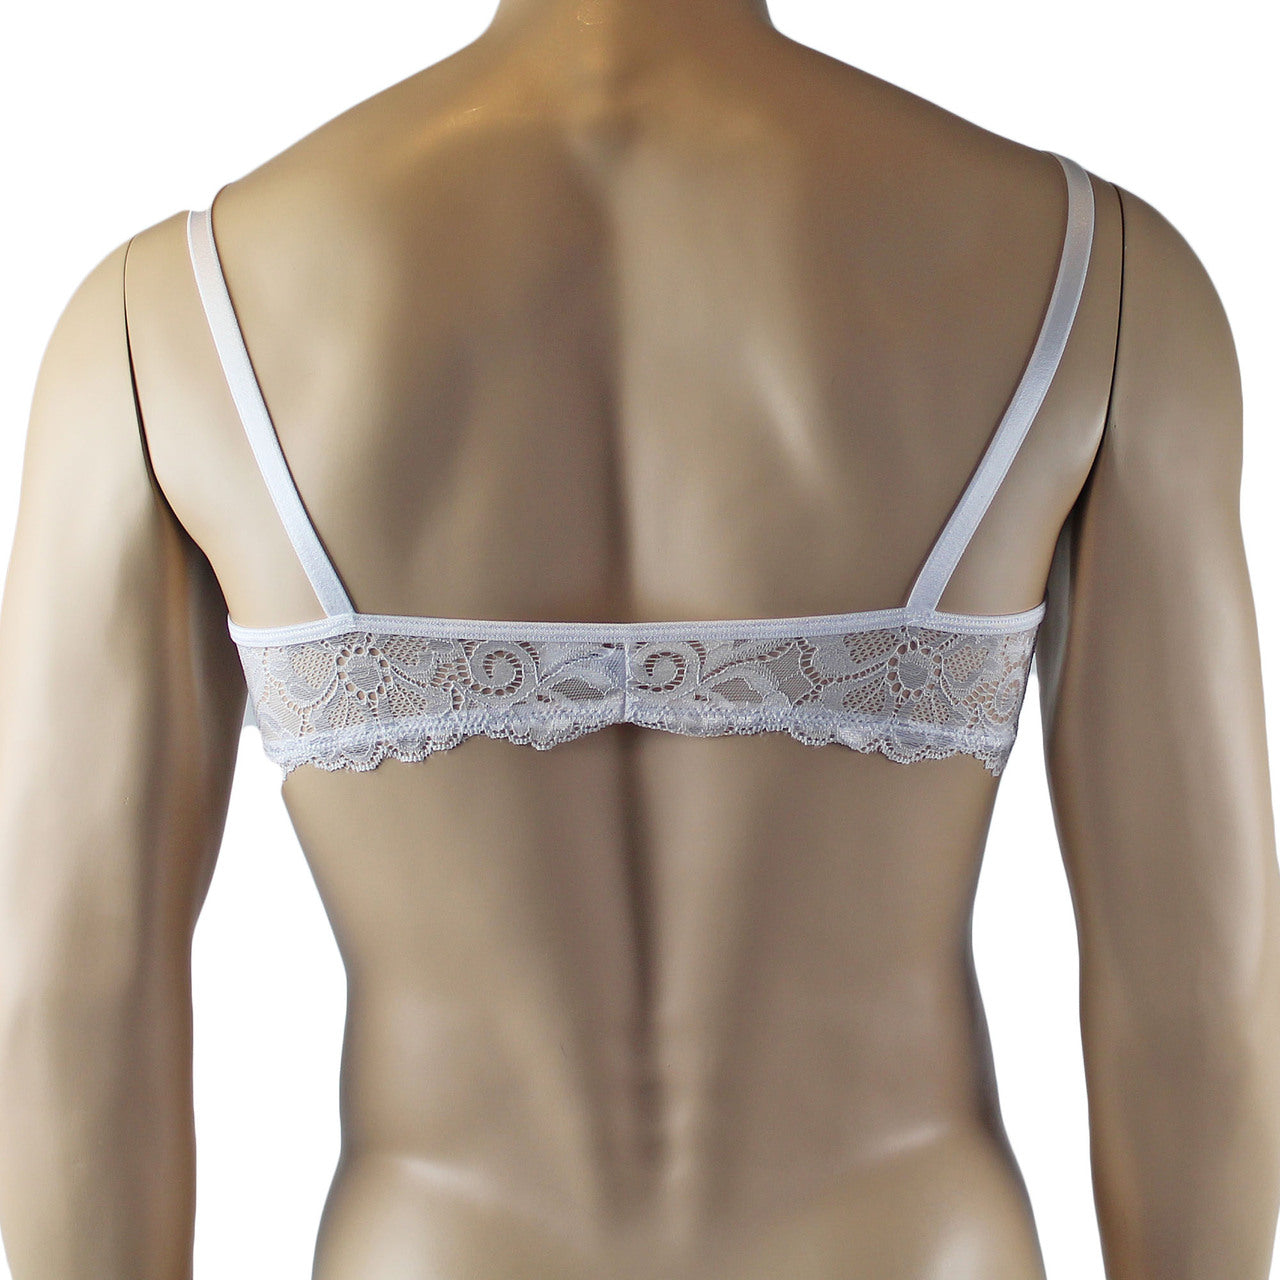 Mens Scalloped Shiny Lace Bra Top for Males (white plus other colours)